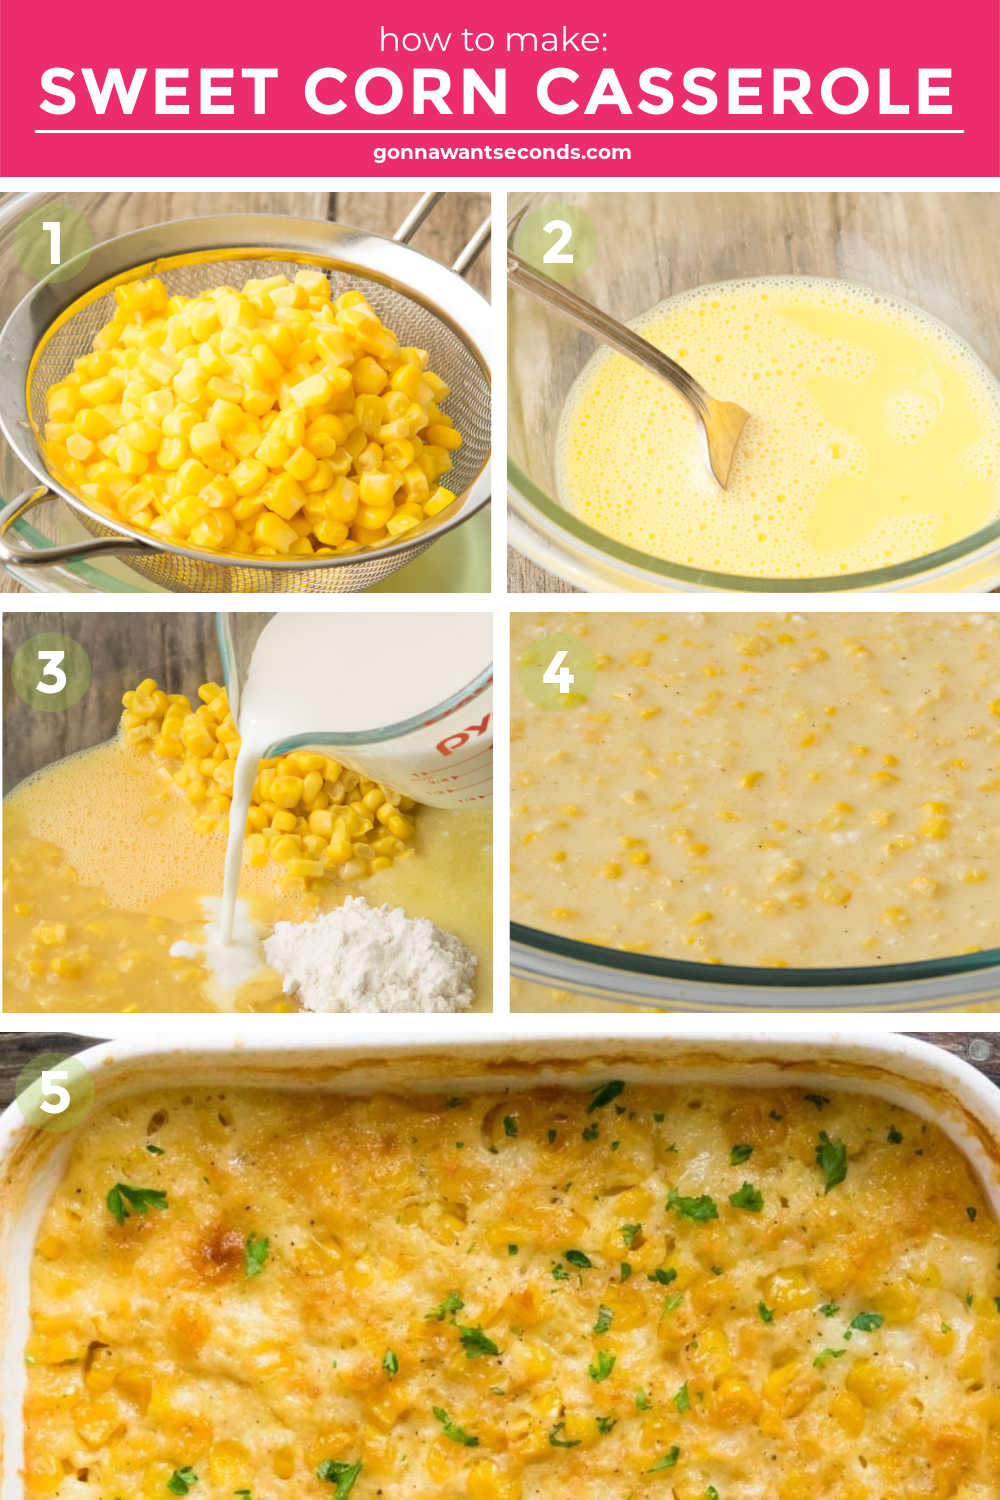 Step by step how to make sweet corn casserole